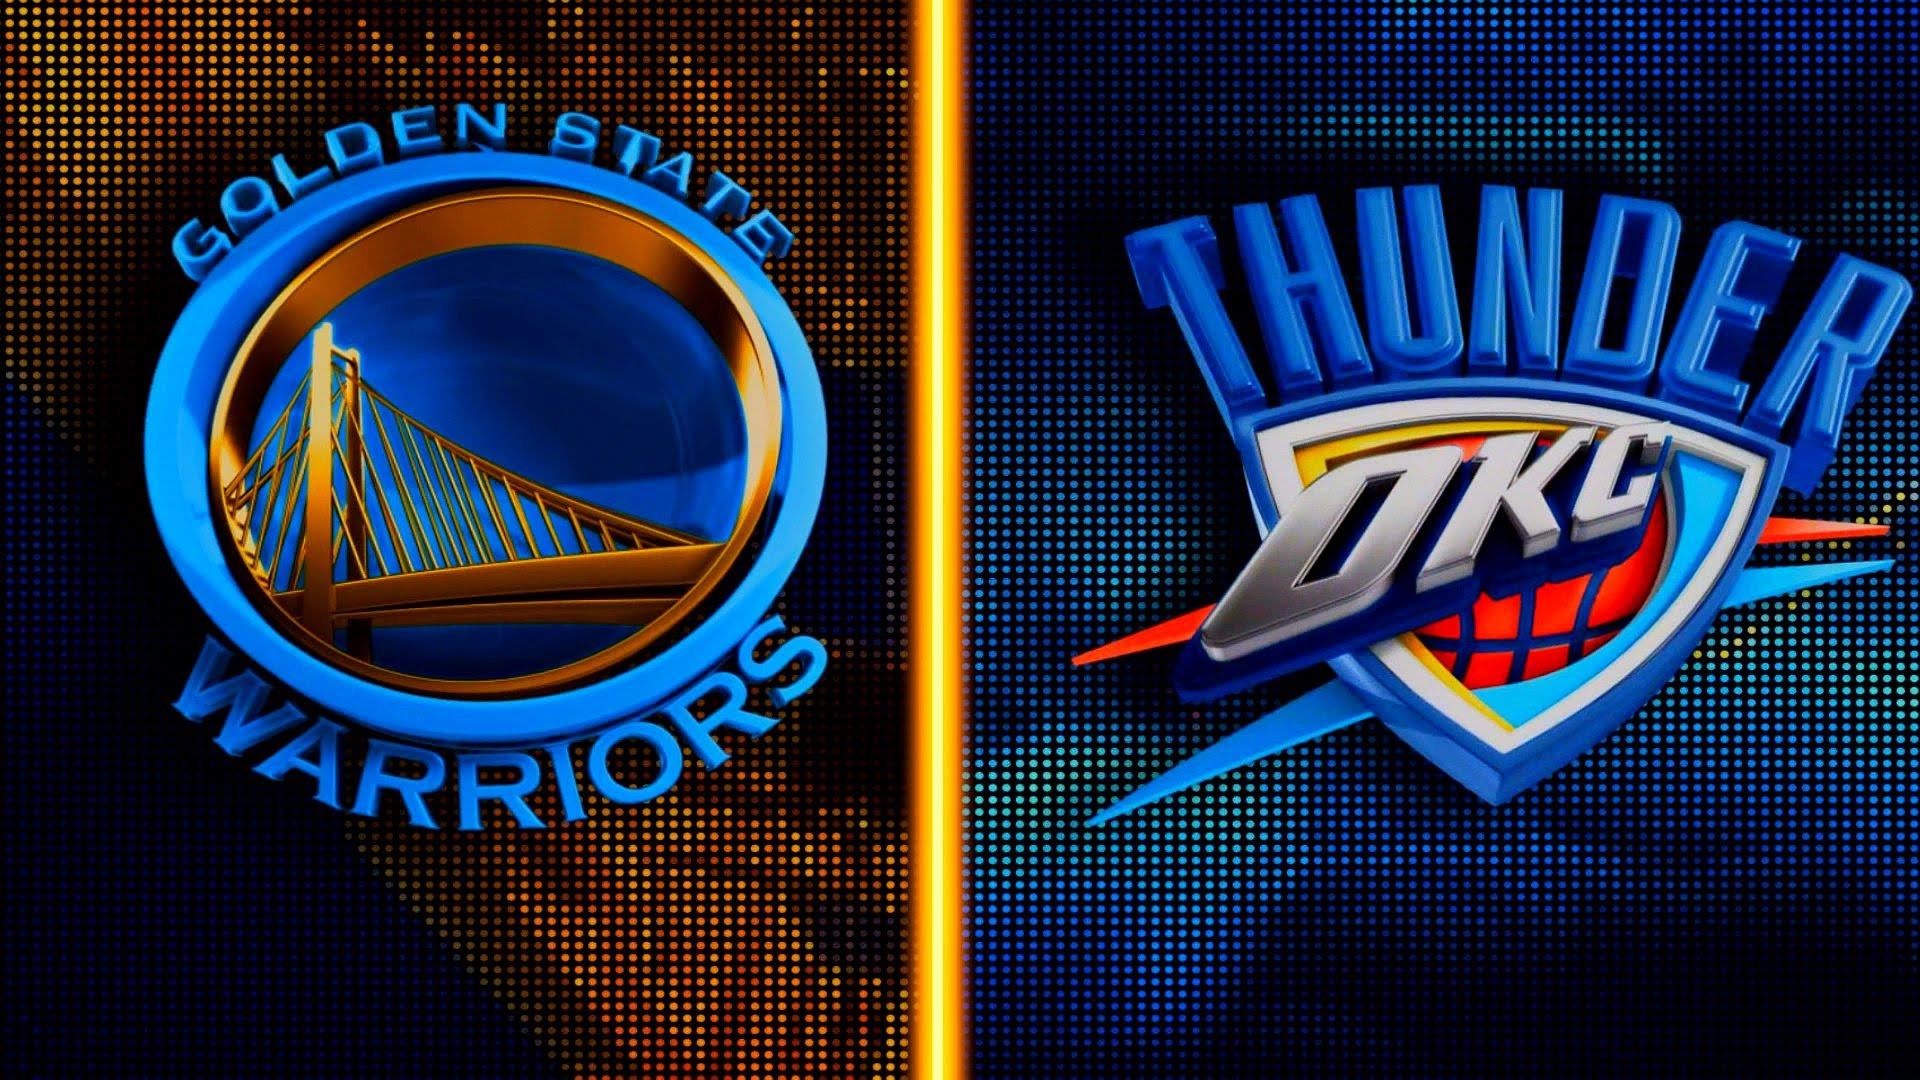 Golden State Warriors And Cavaliers Logo , HD Wallpaper & Backgrounds